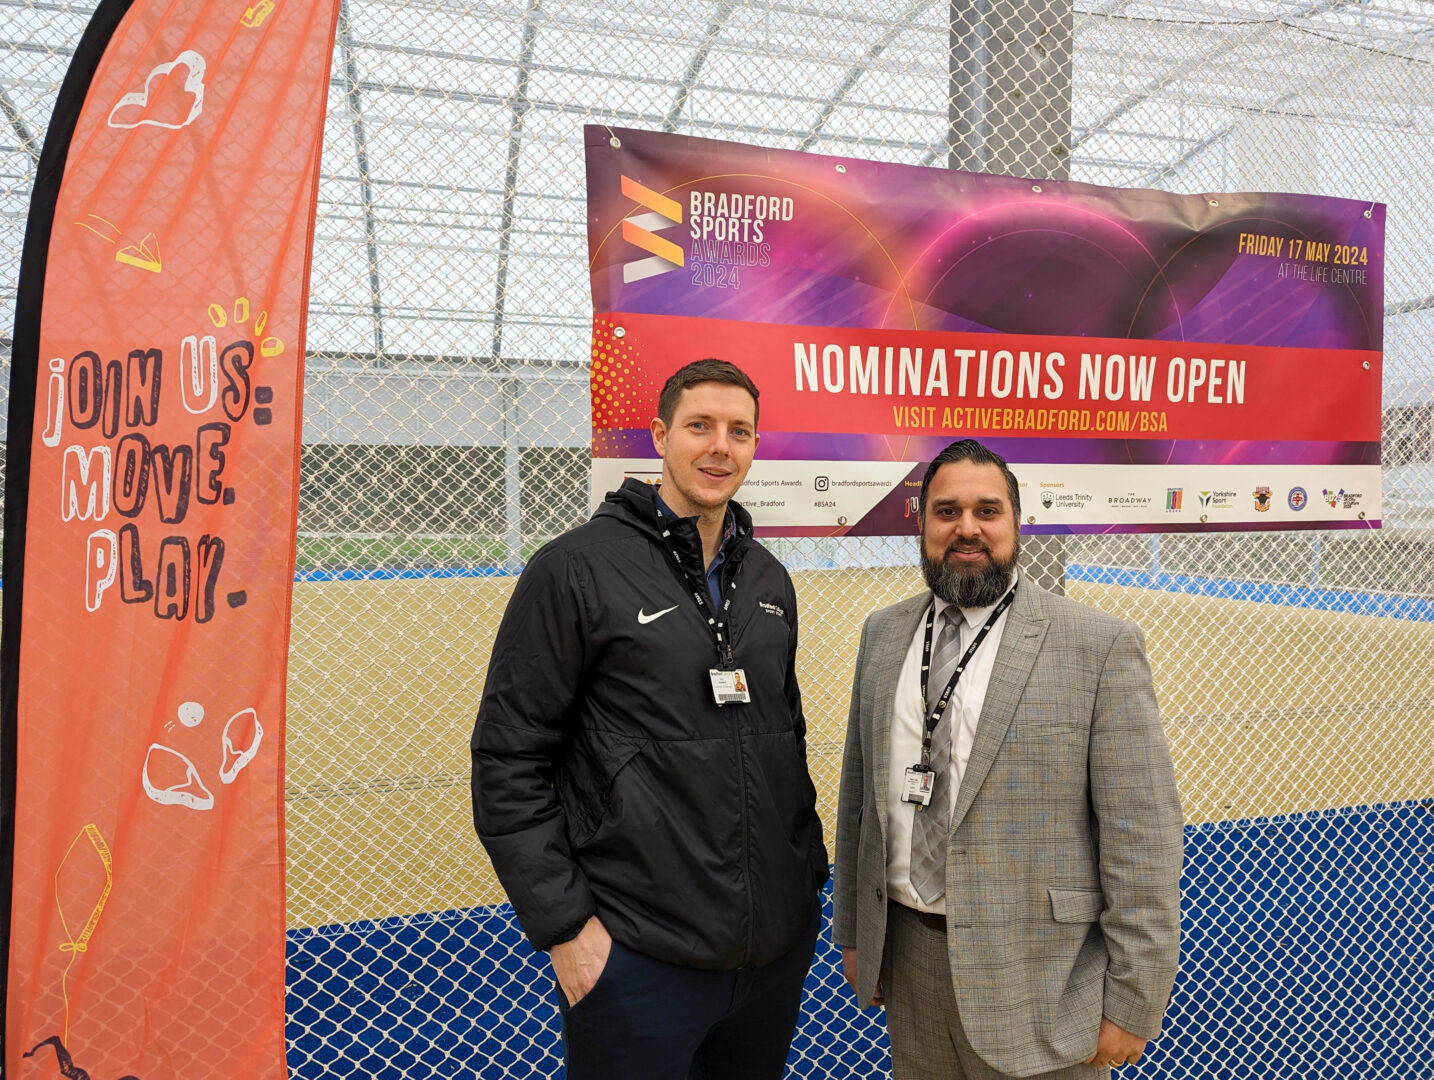 two members of bradford college sponsoring a category at the bradford sports awards 2024